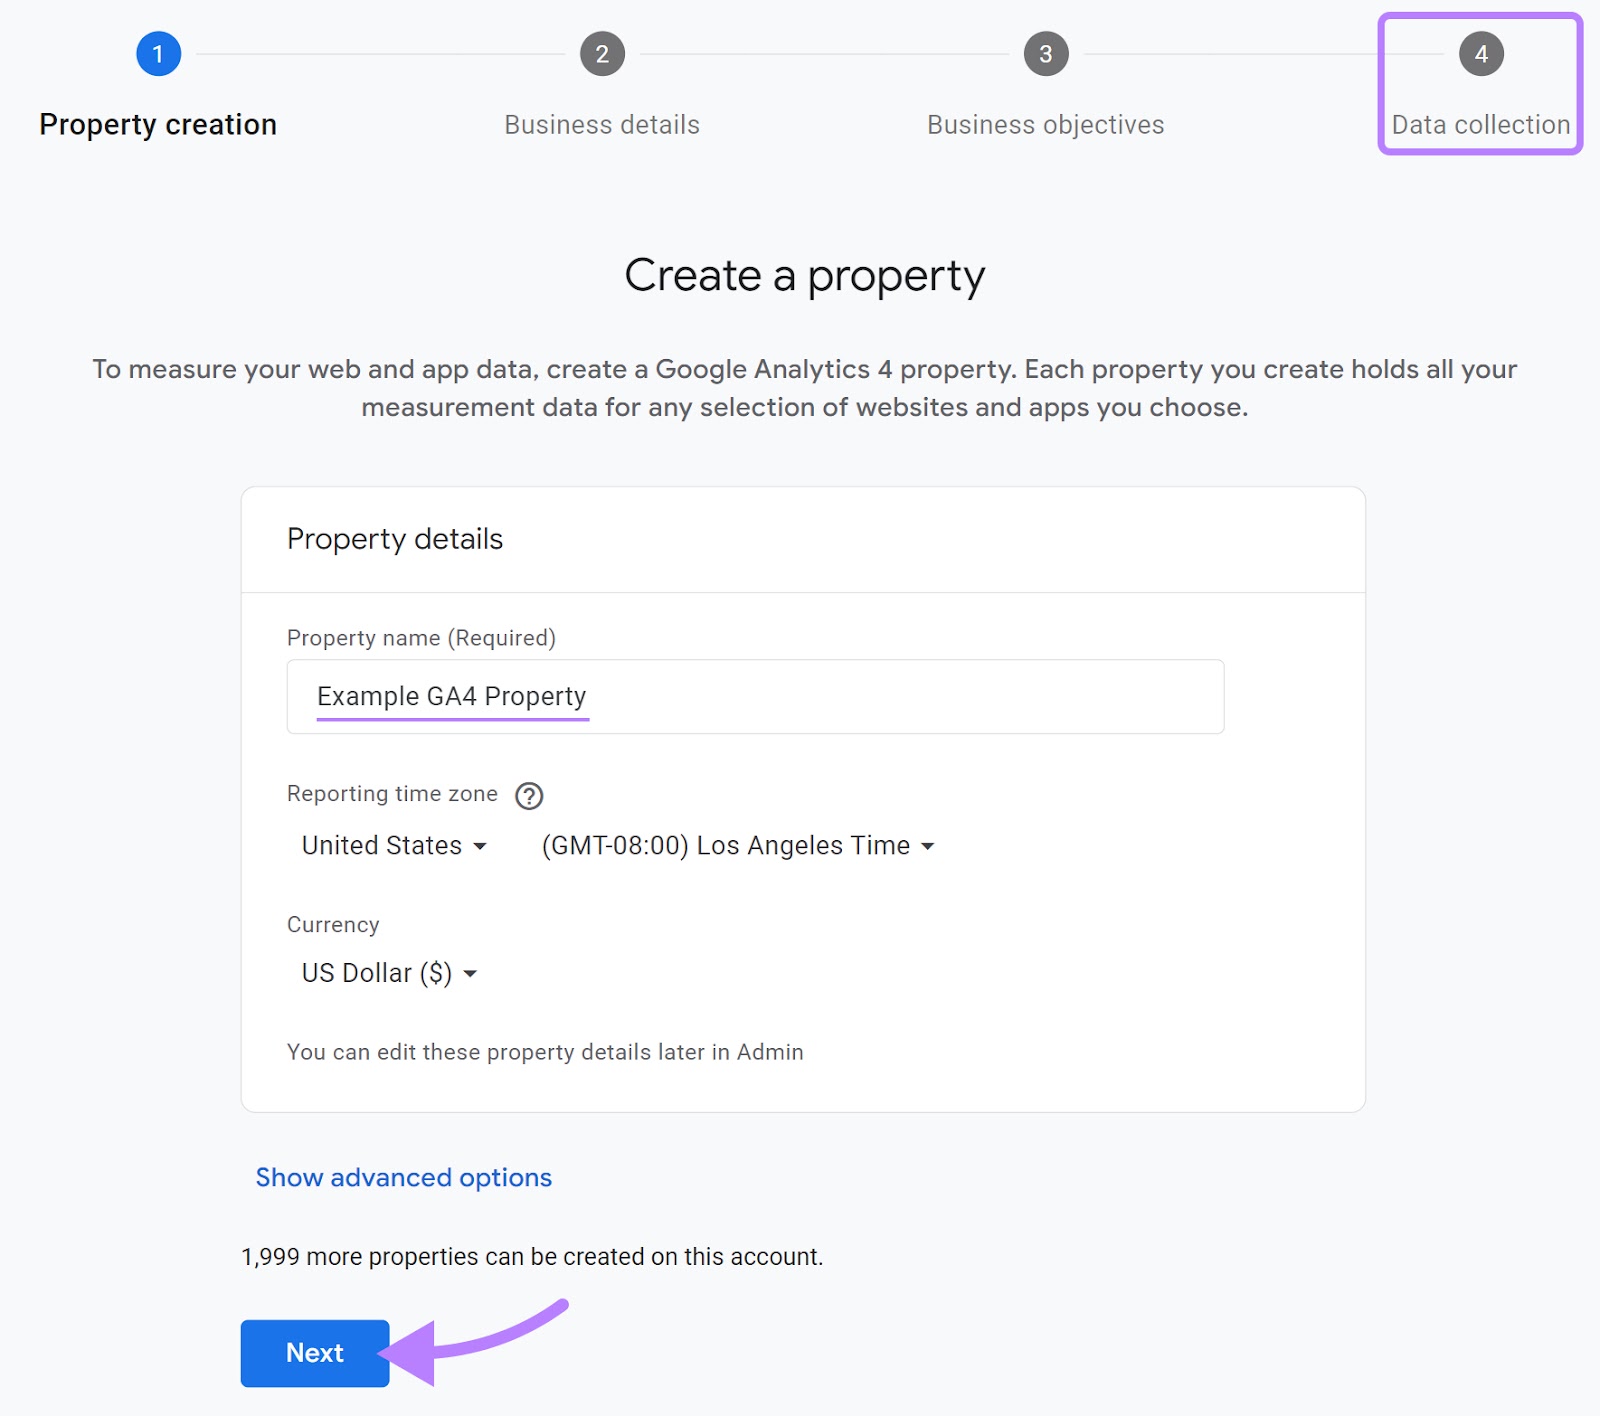 "Create a property" step one in setting up Google Analytics